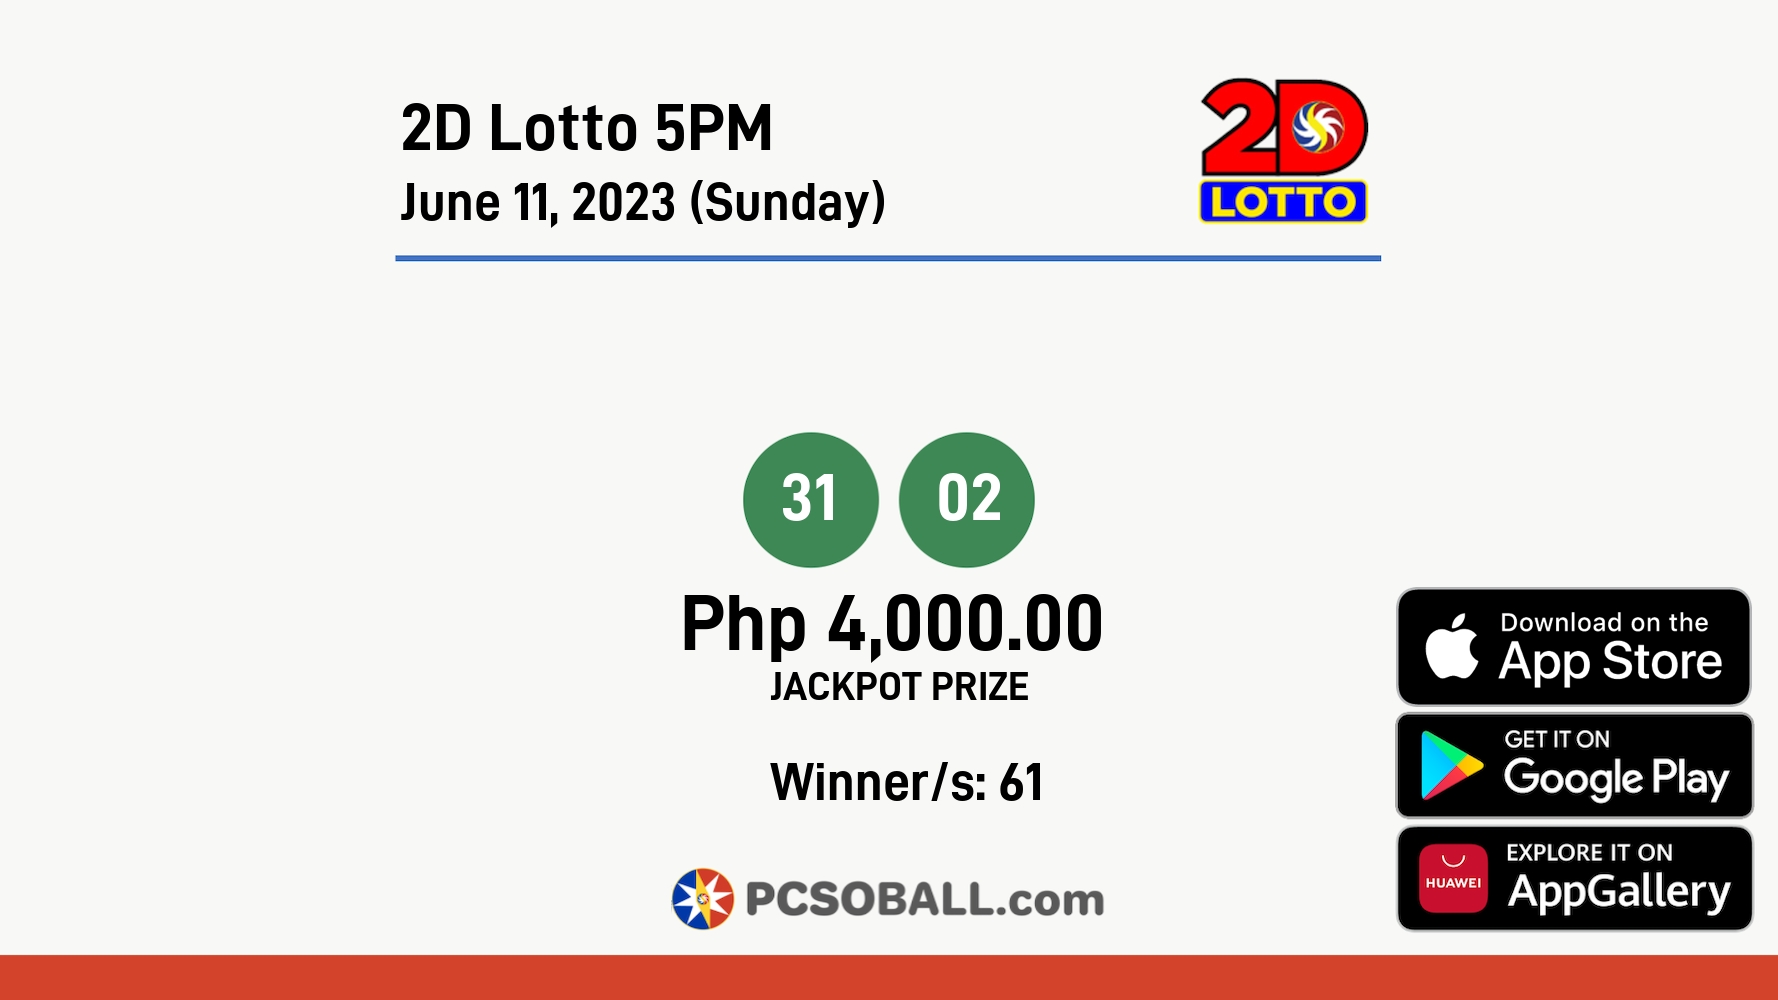 2D Lotto 5PM June 11, 2023 (Sunday) Result